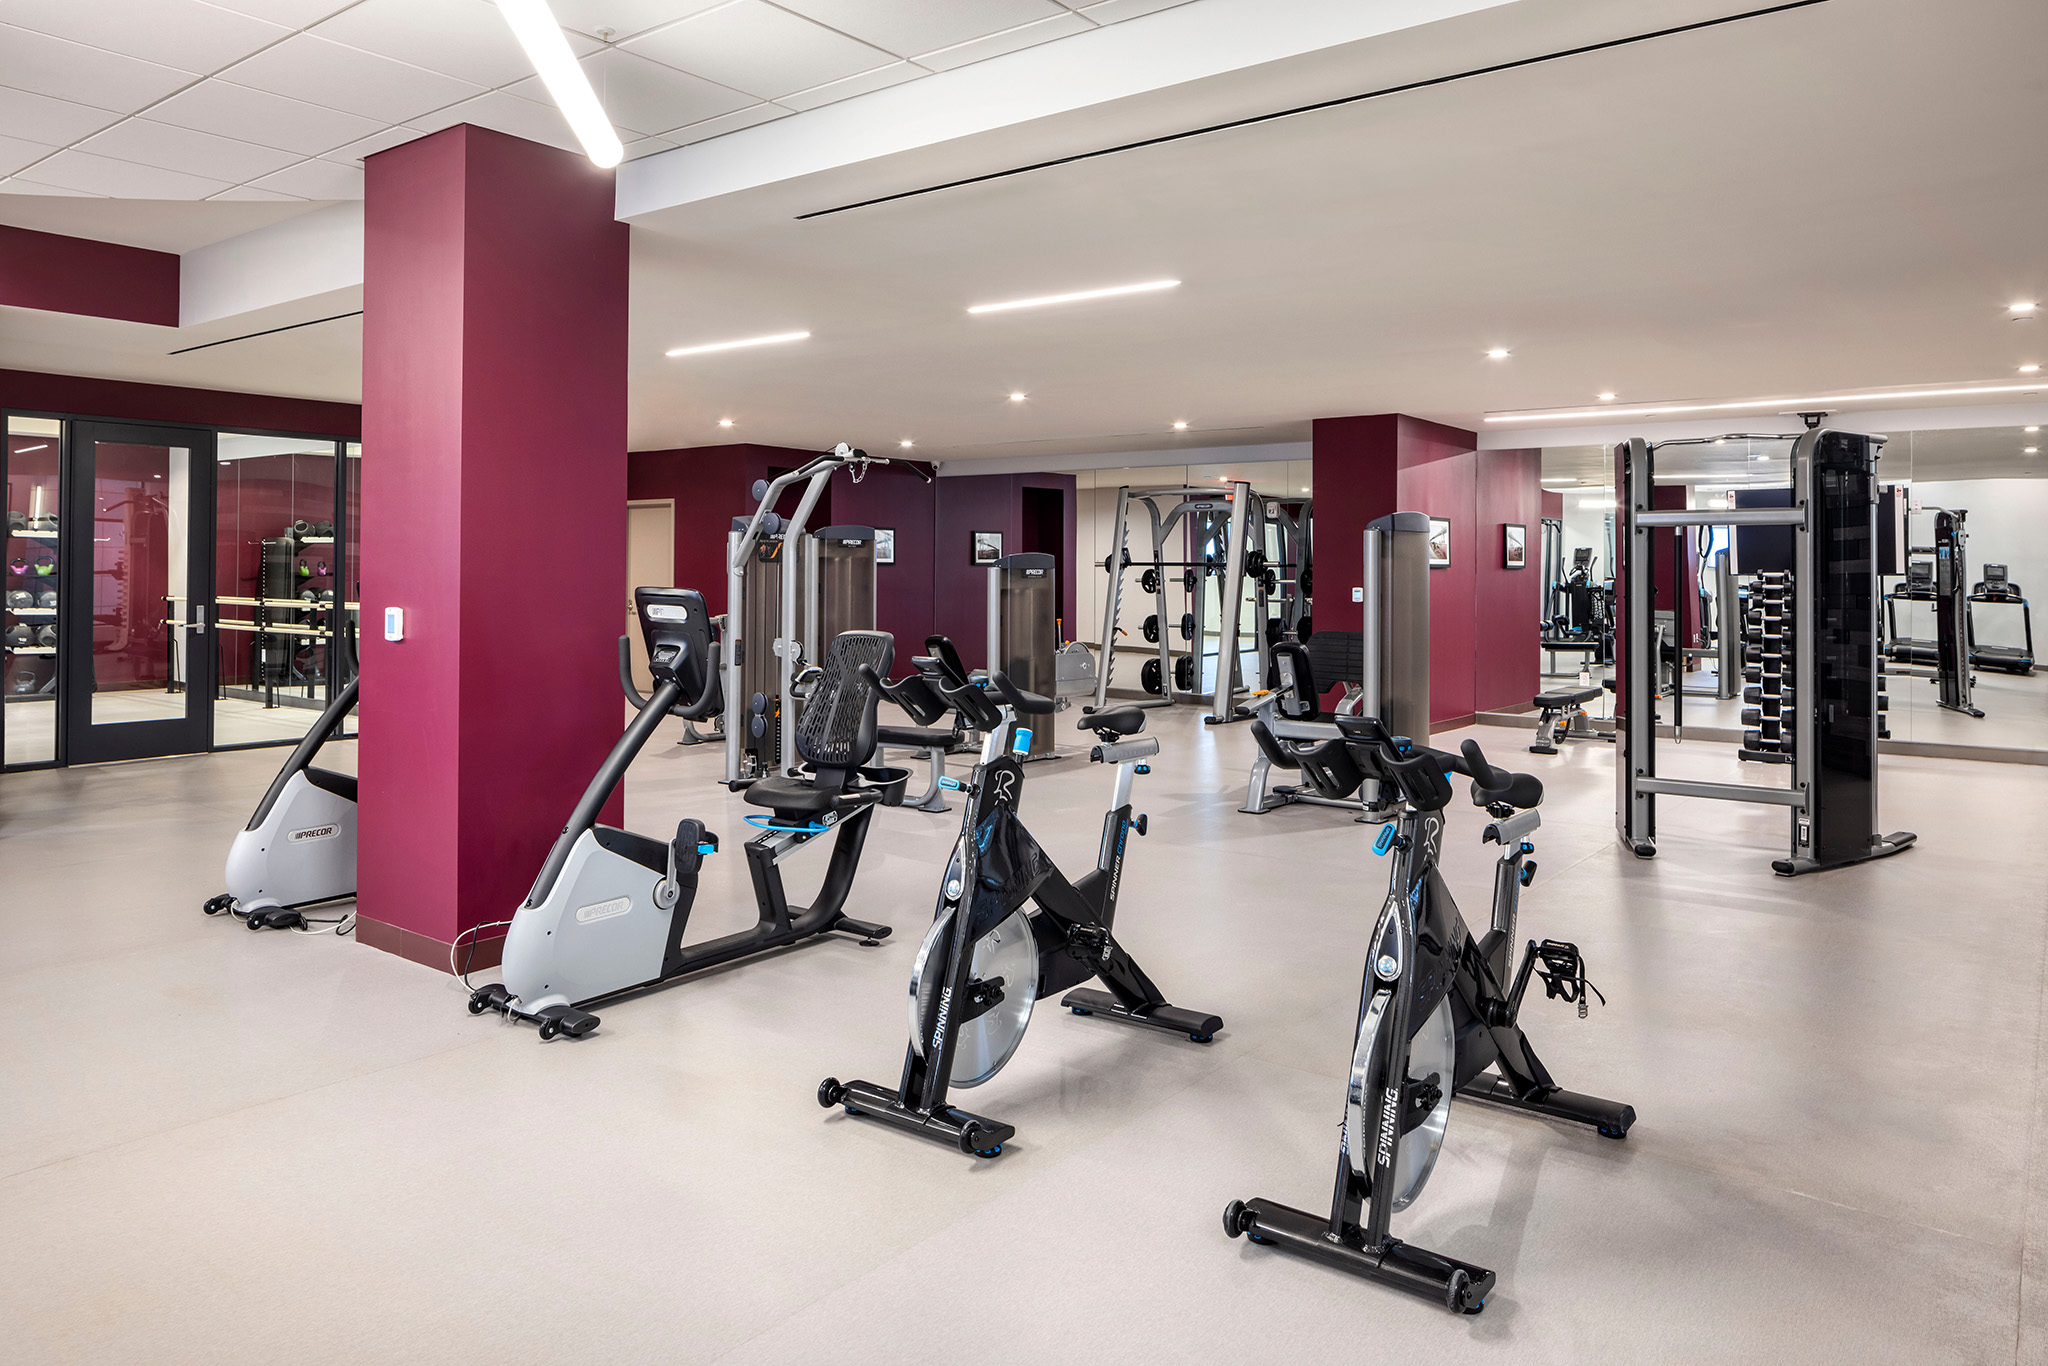 Gym room at 42 Broad, Phius-certified apartment complex